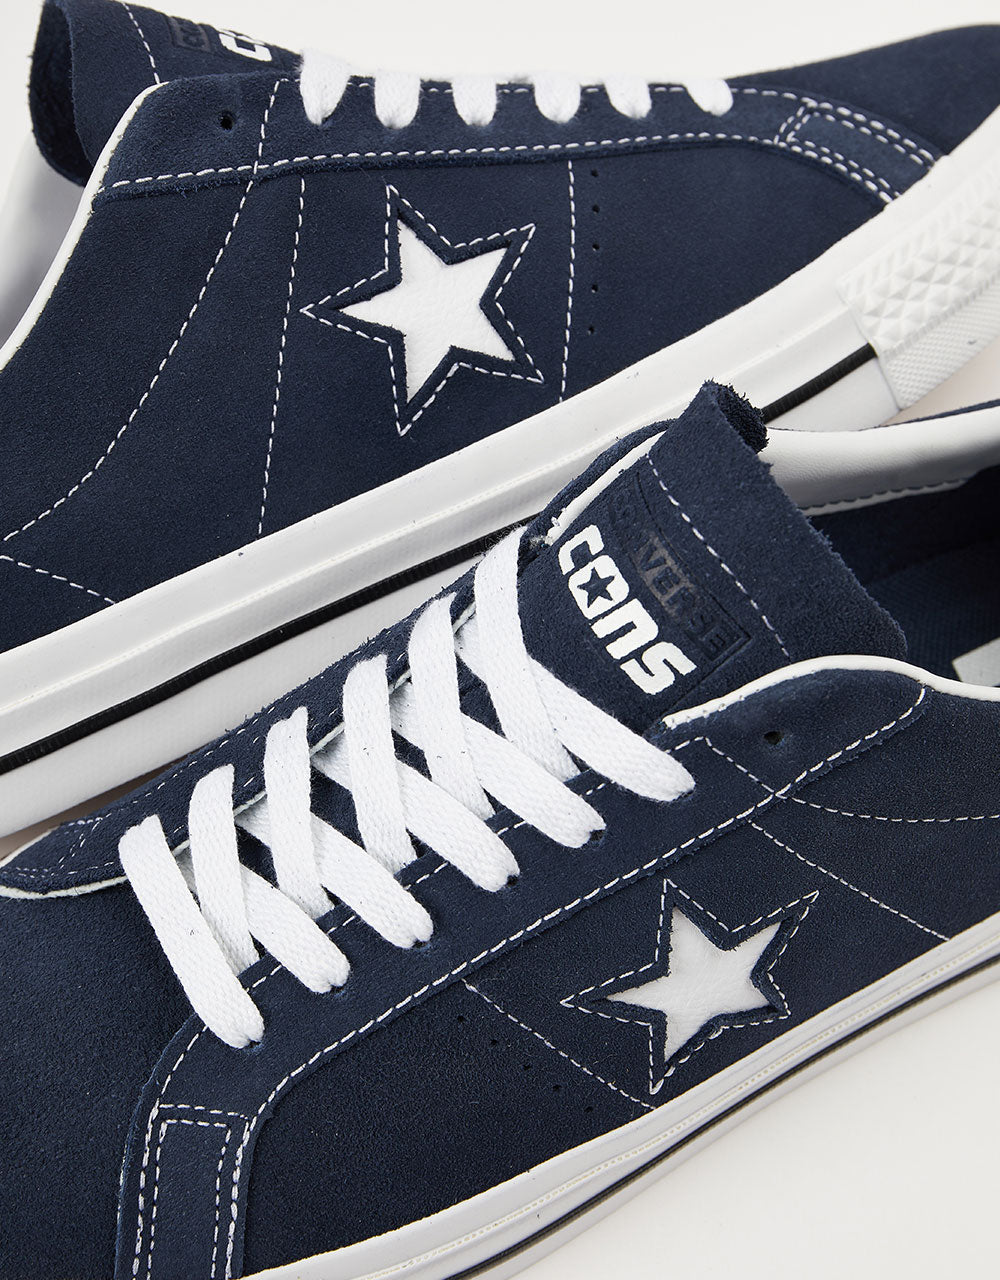 Converse One Star Pro Ox Classic Suede Skate Shoes - Navy/White/Black